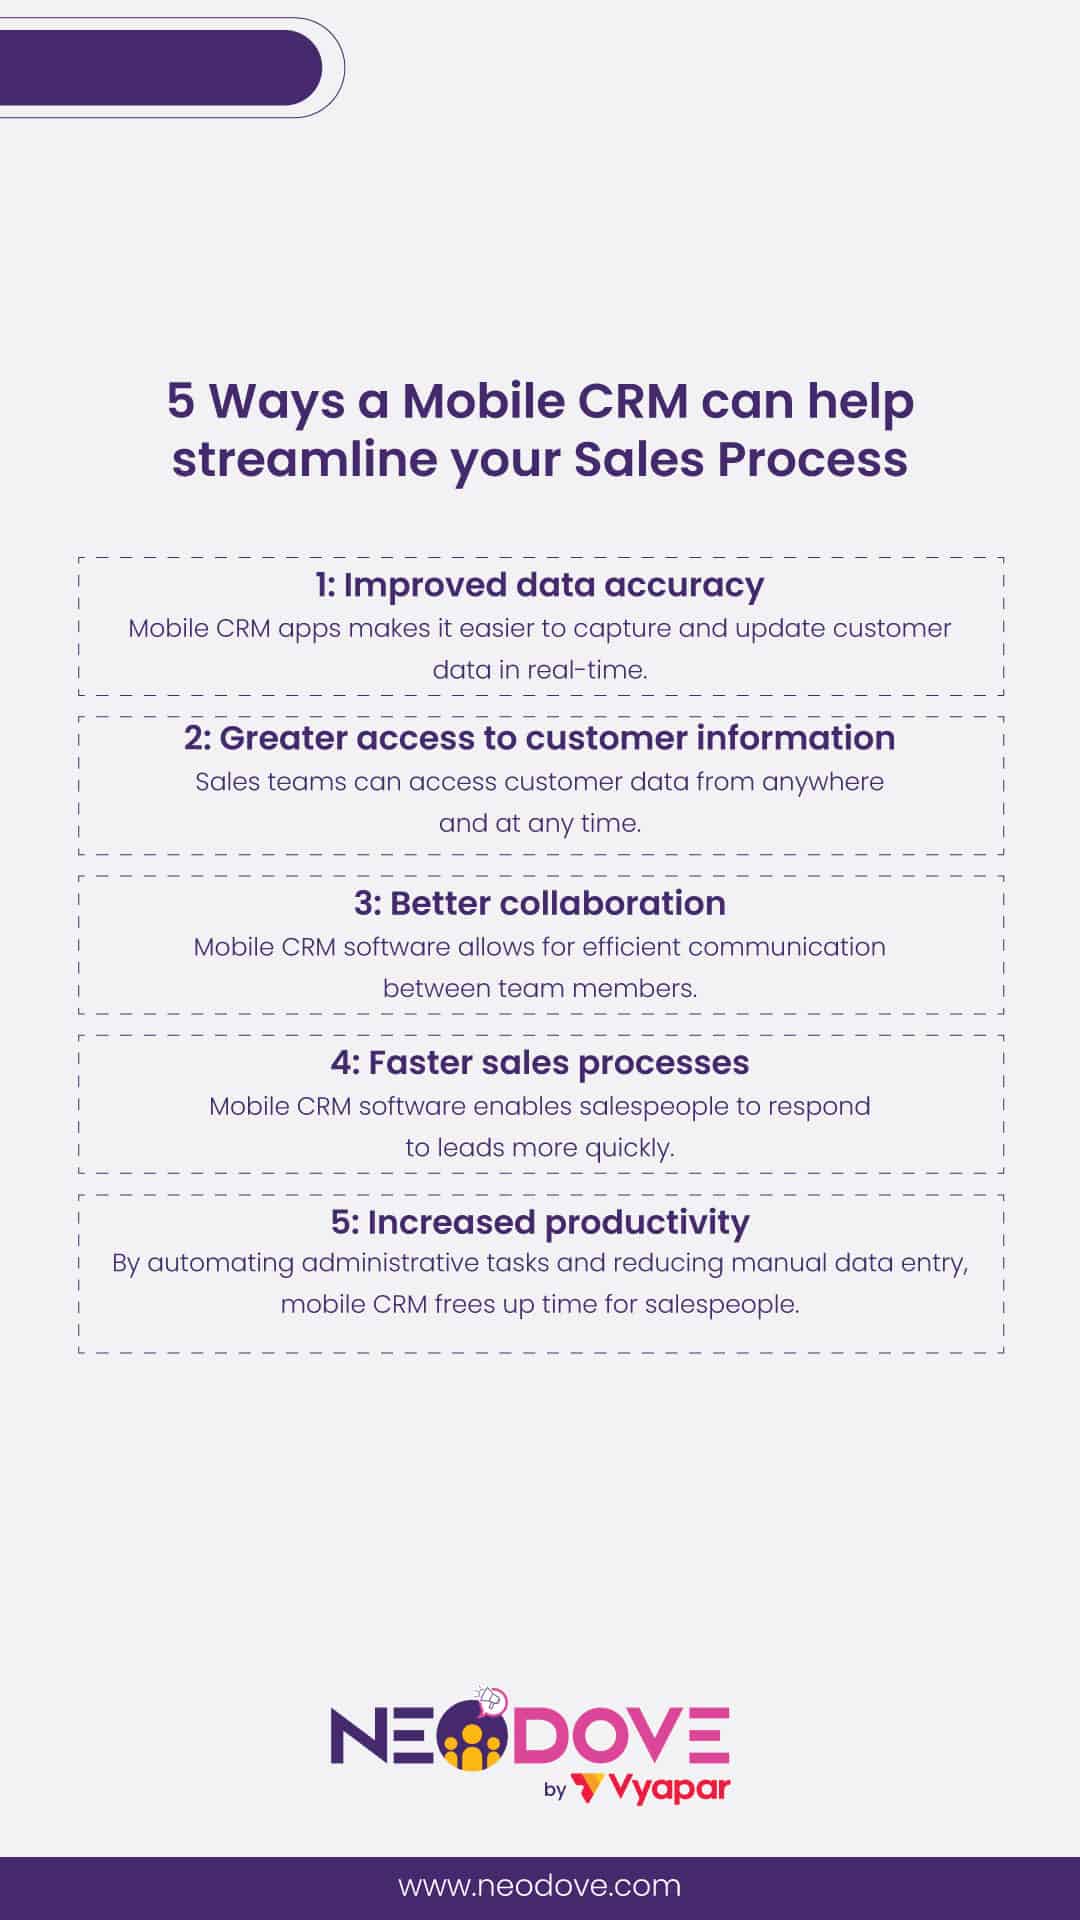 5 Ways a Mobile CRM can streamline your Sales Process - NeoDove